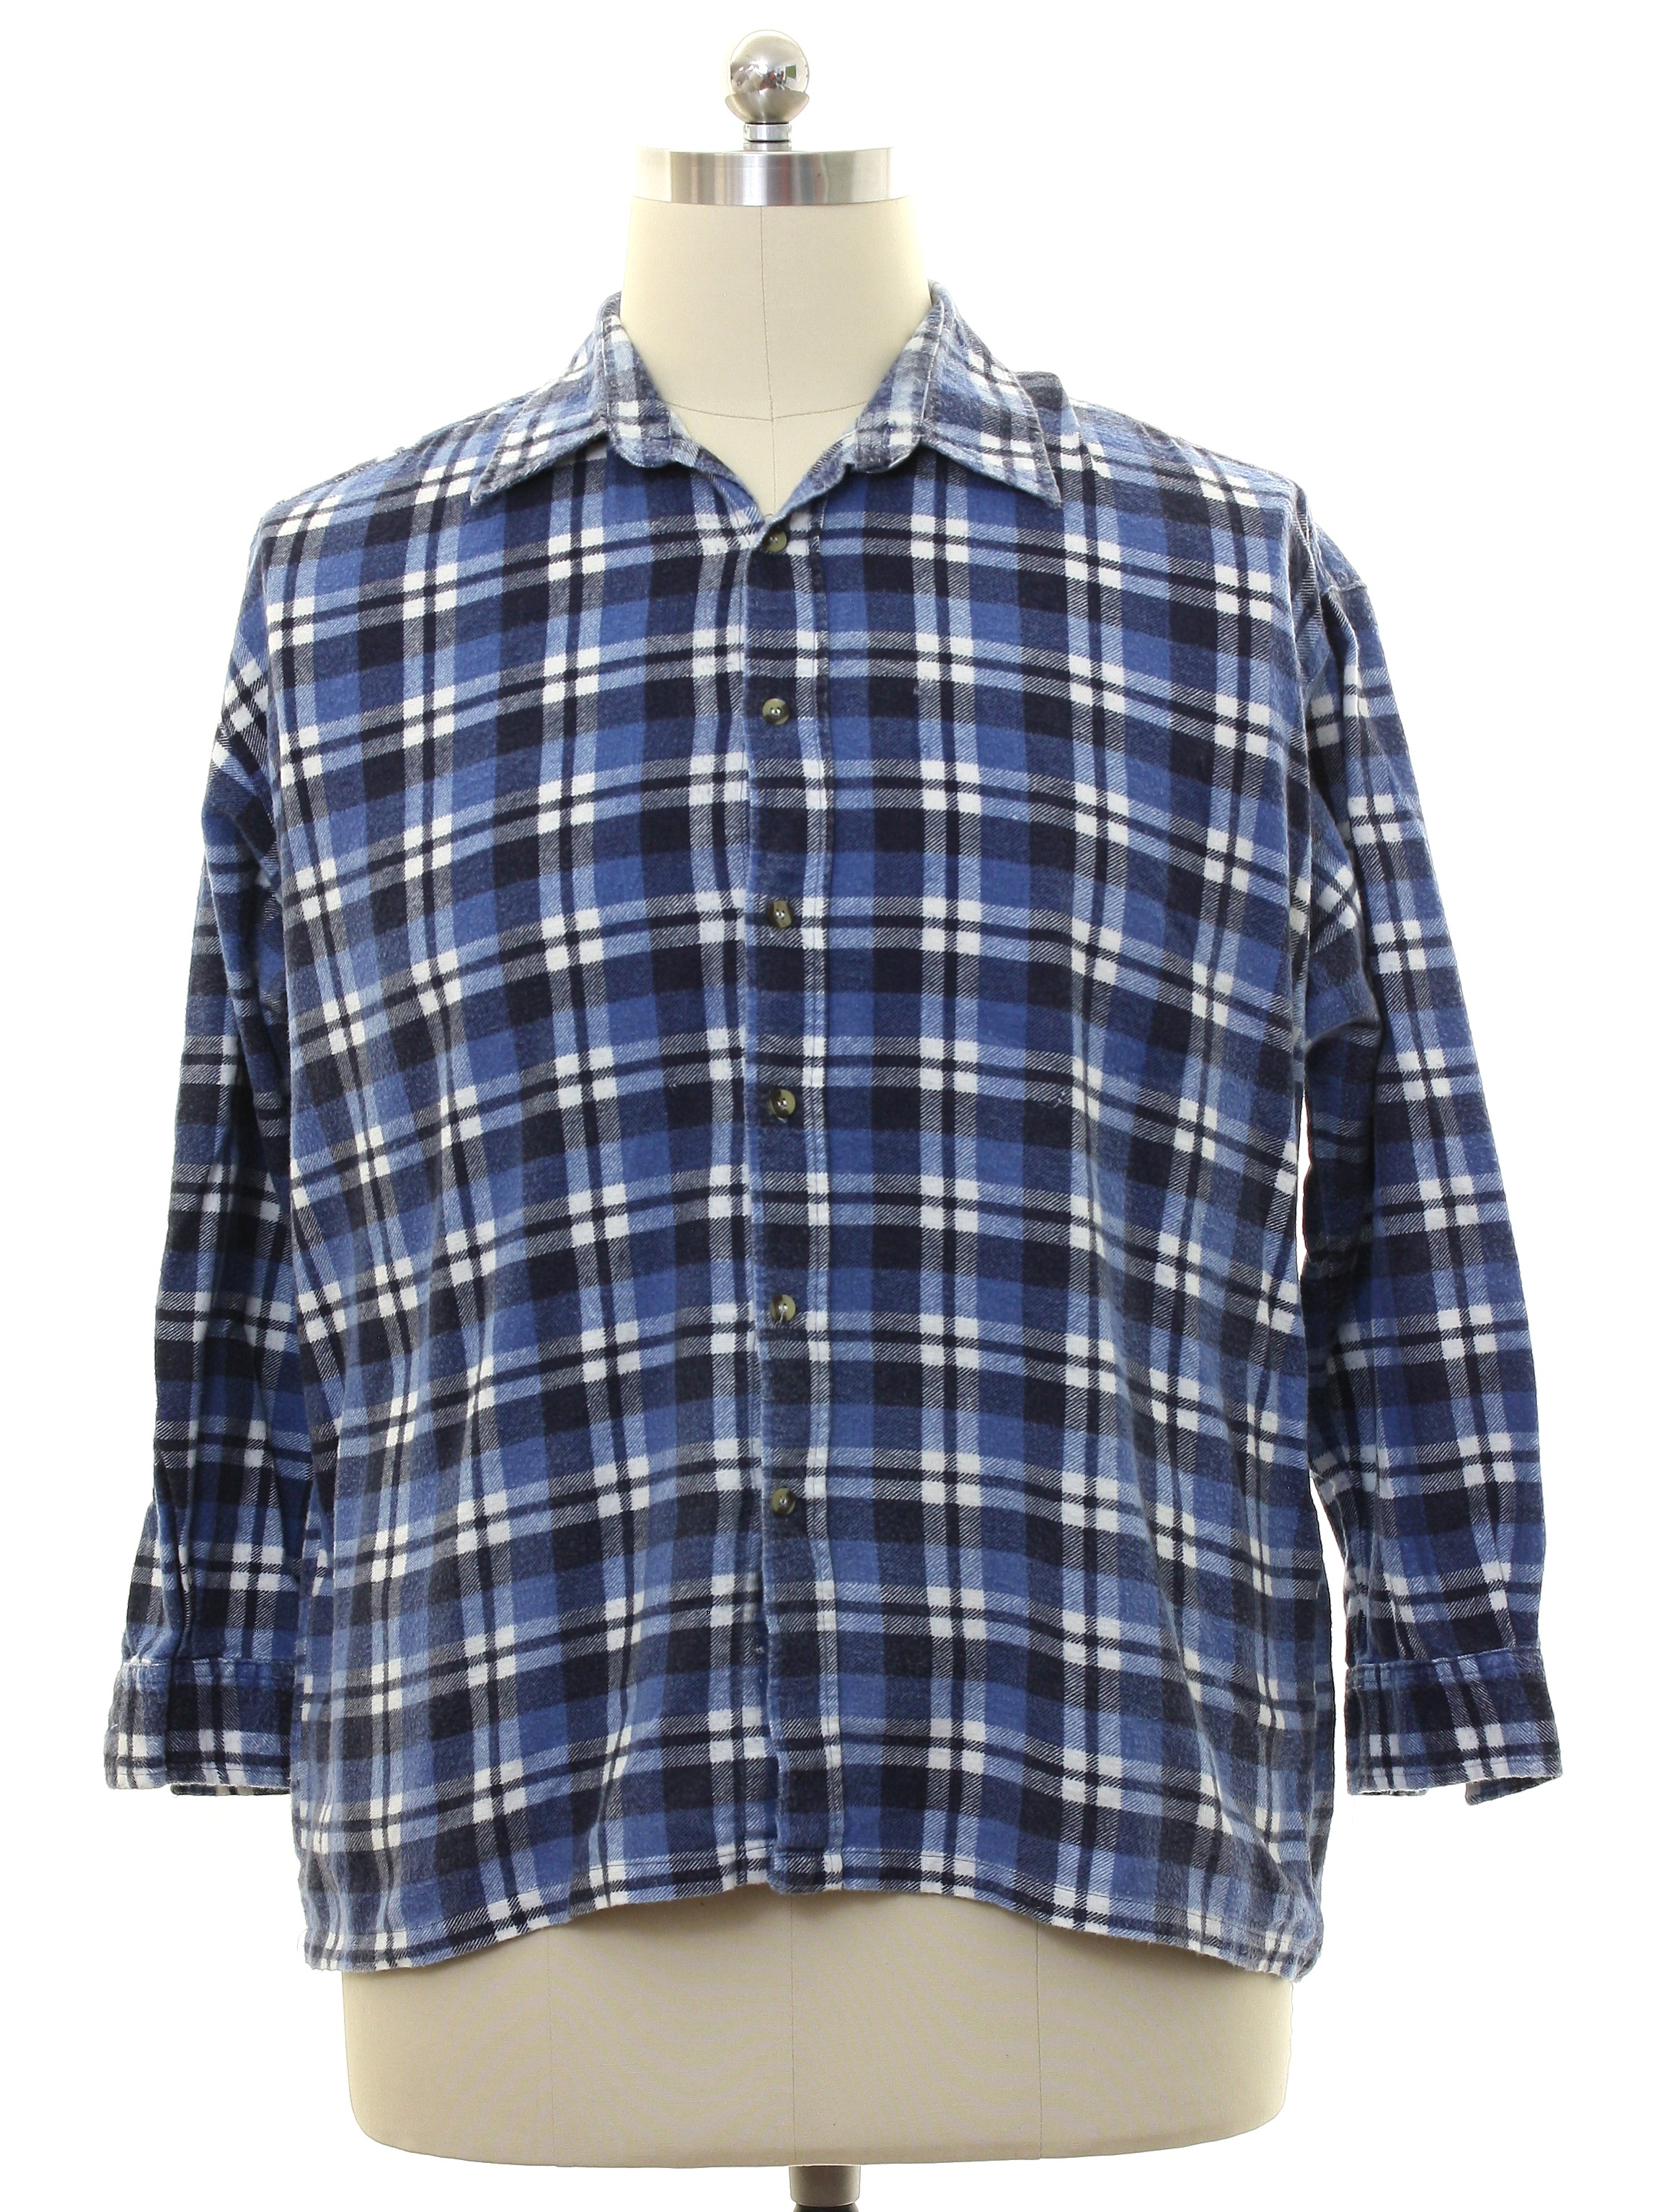 Shirt: 90s -Outback Rider- Mens navy, blue, and whtie plaid cotton ...